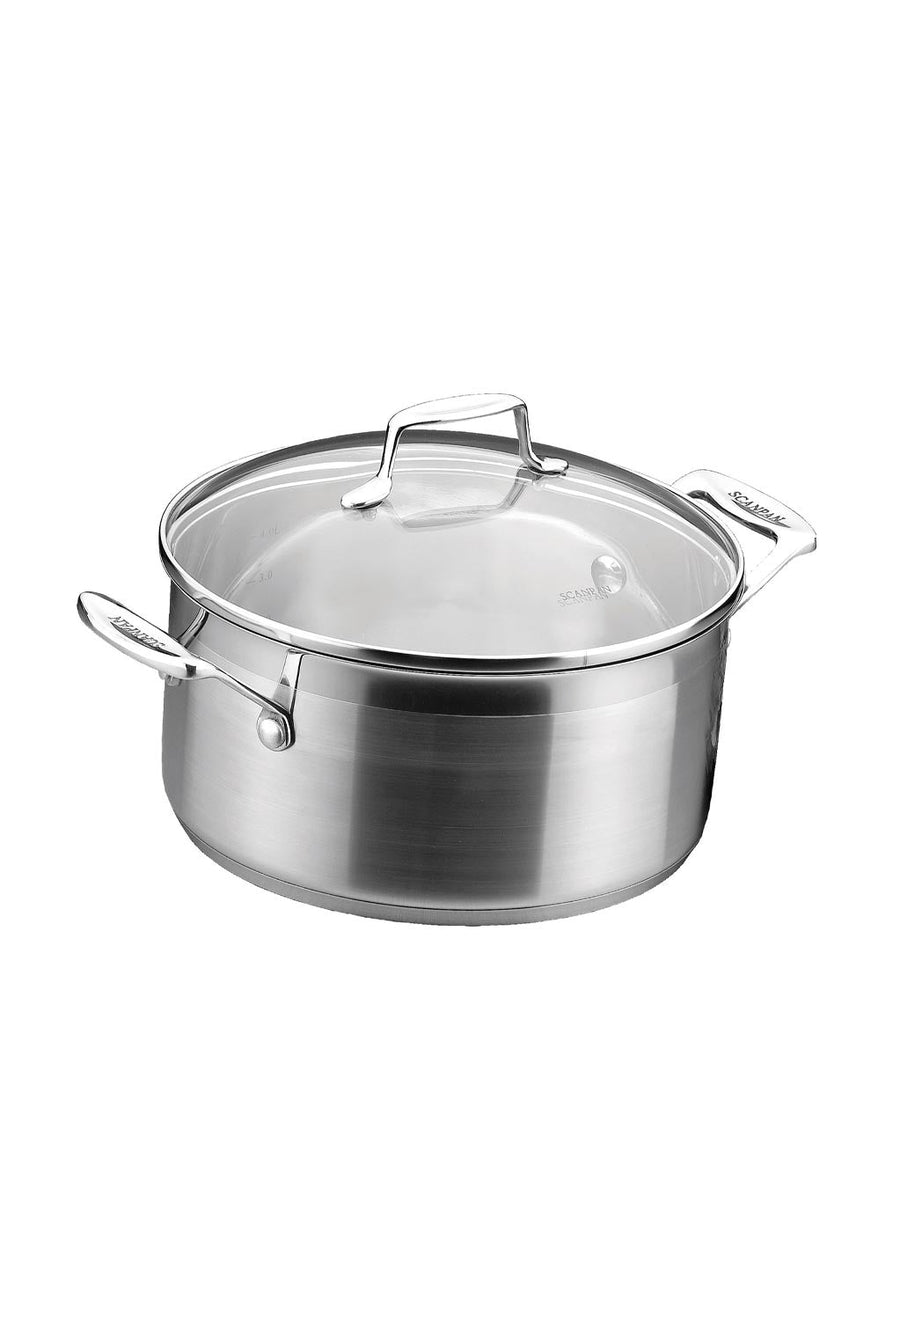 Scanpan Impact Dutch Oven with Lid